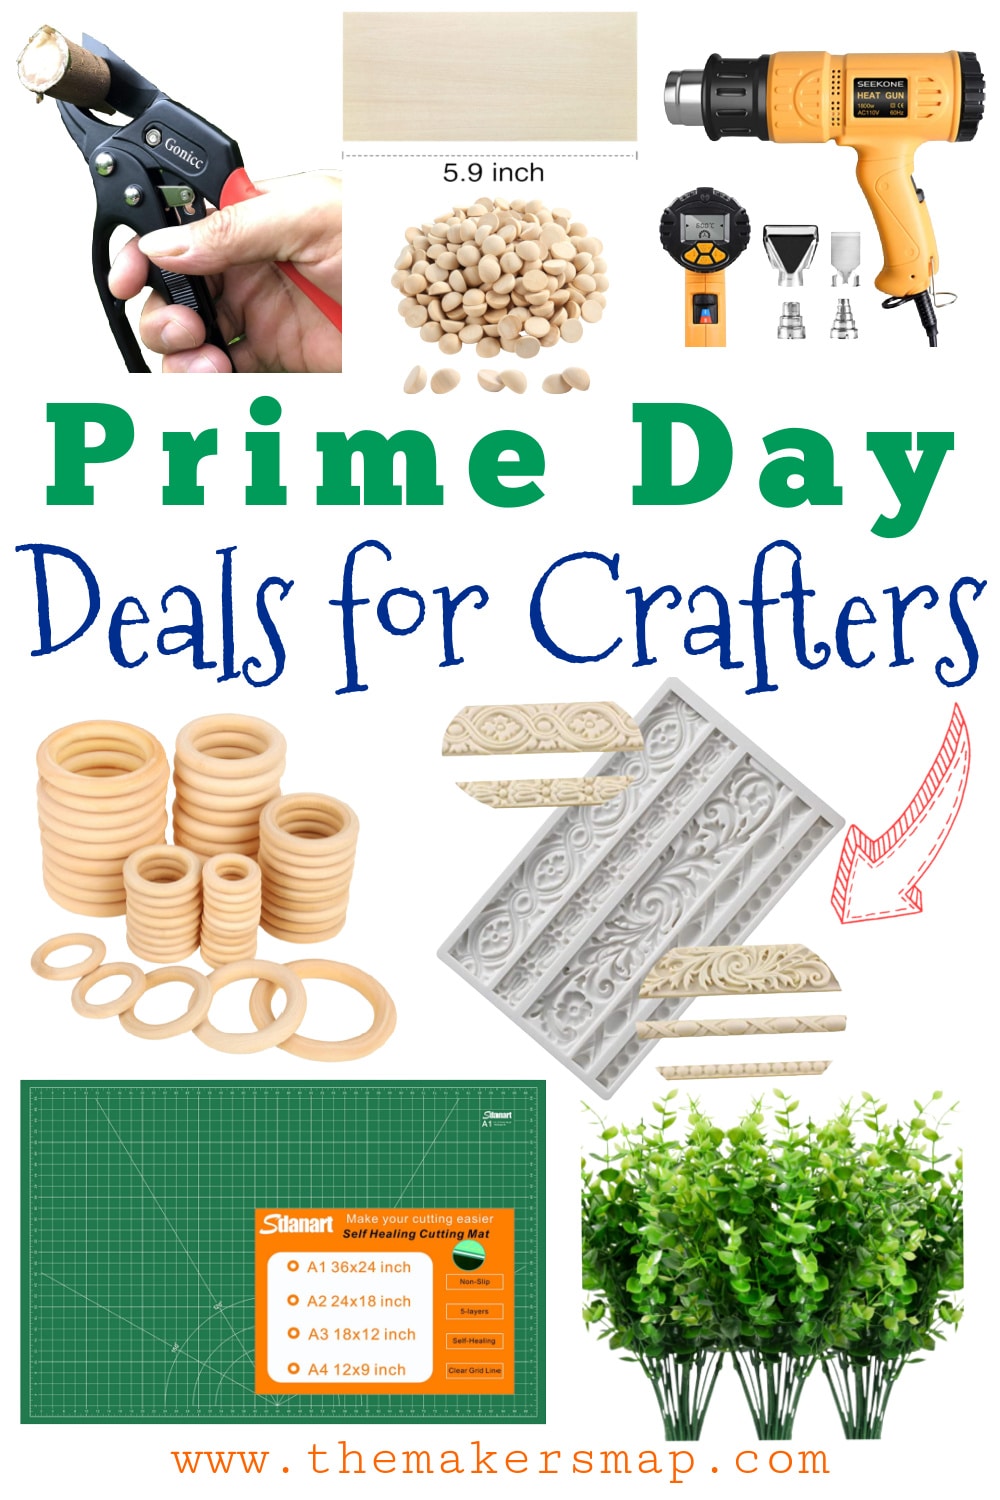 https://www.themakersmap.com/wp-content/uploads/2021/06/Amazon-Prime-Day-Deals-for-crafters.jpg